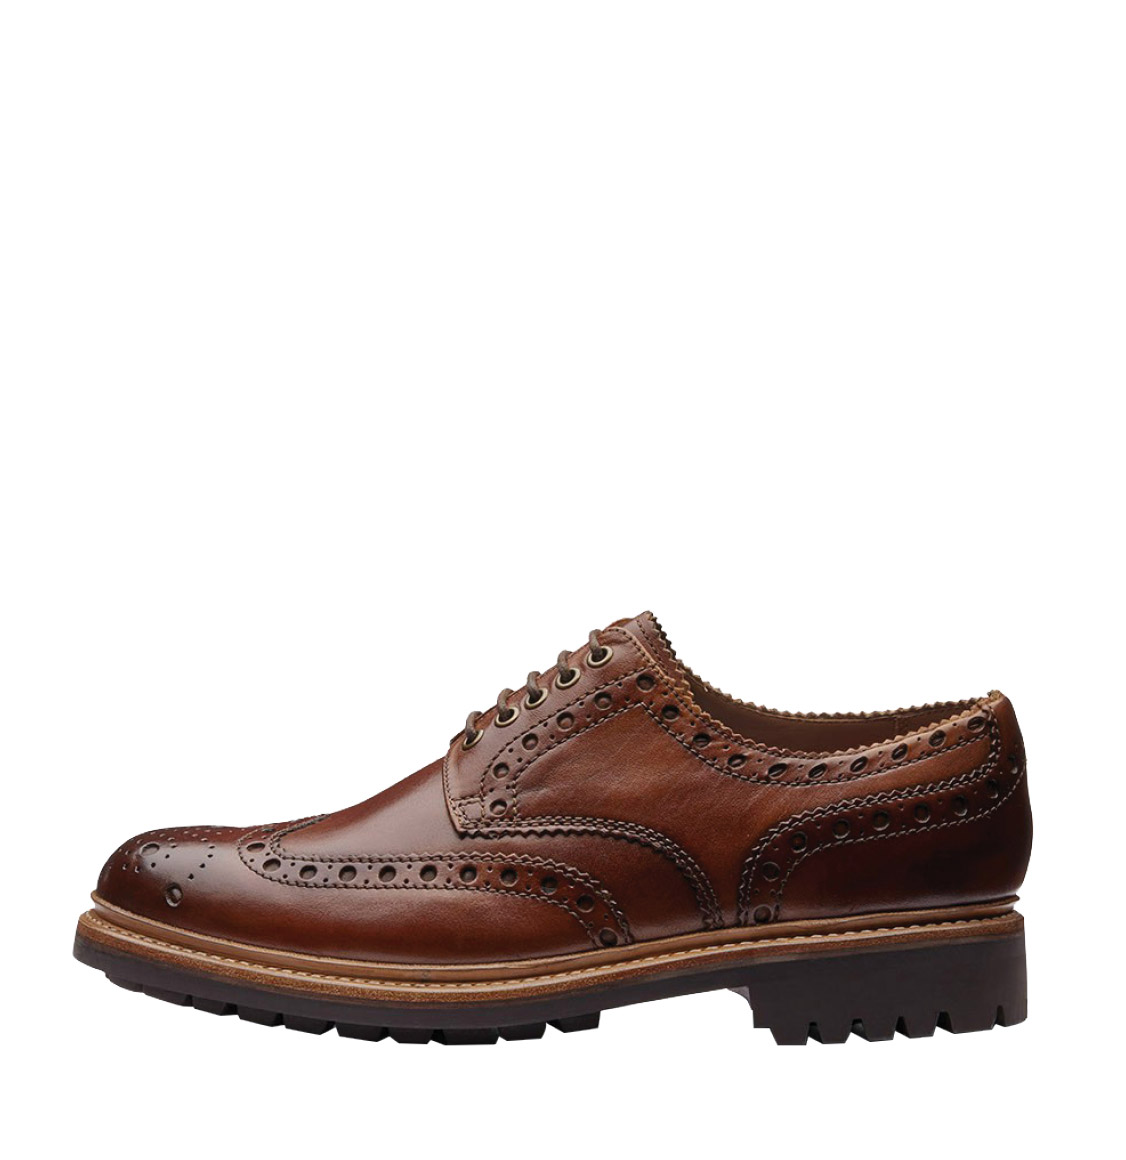 Grenson Archie Goodyear Tan Oxford Brogue Leather Shoes